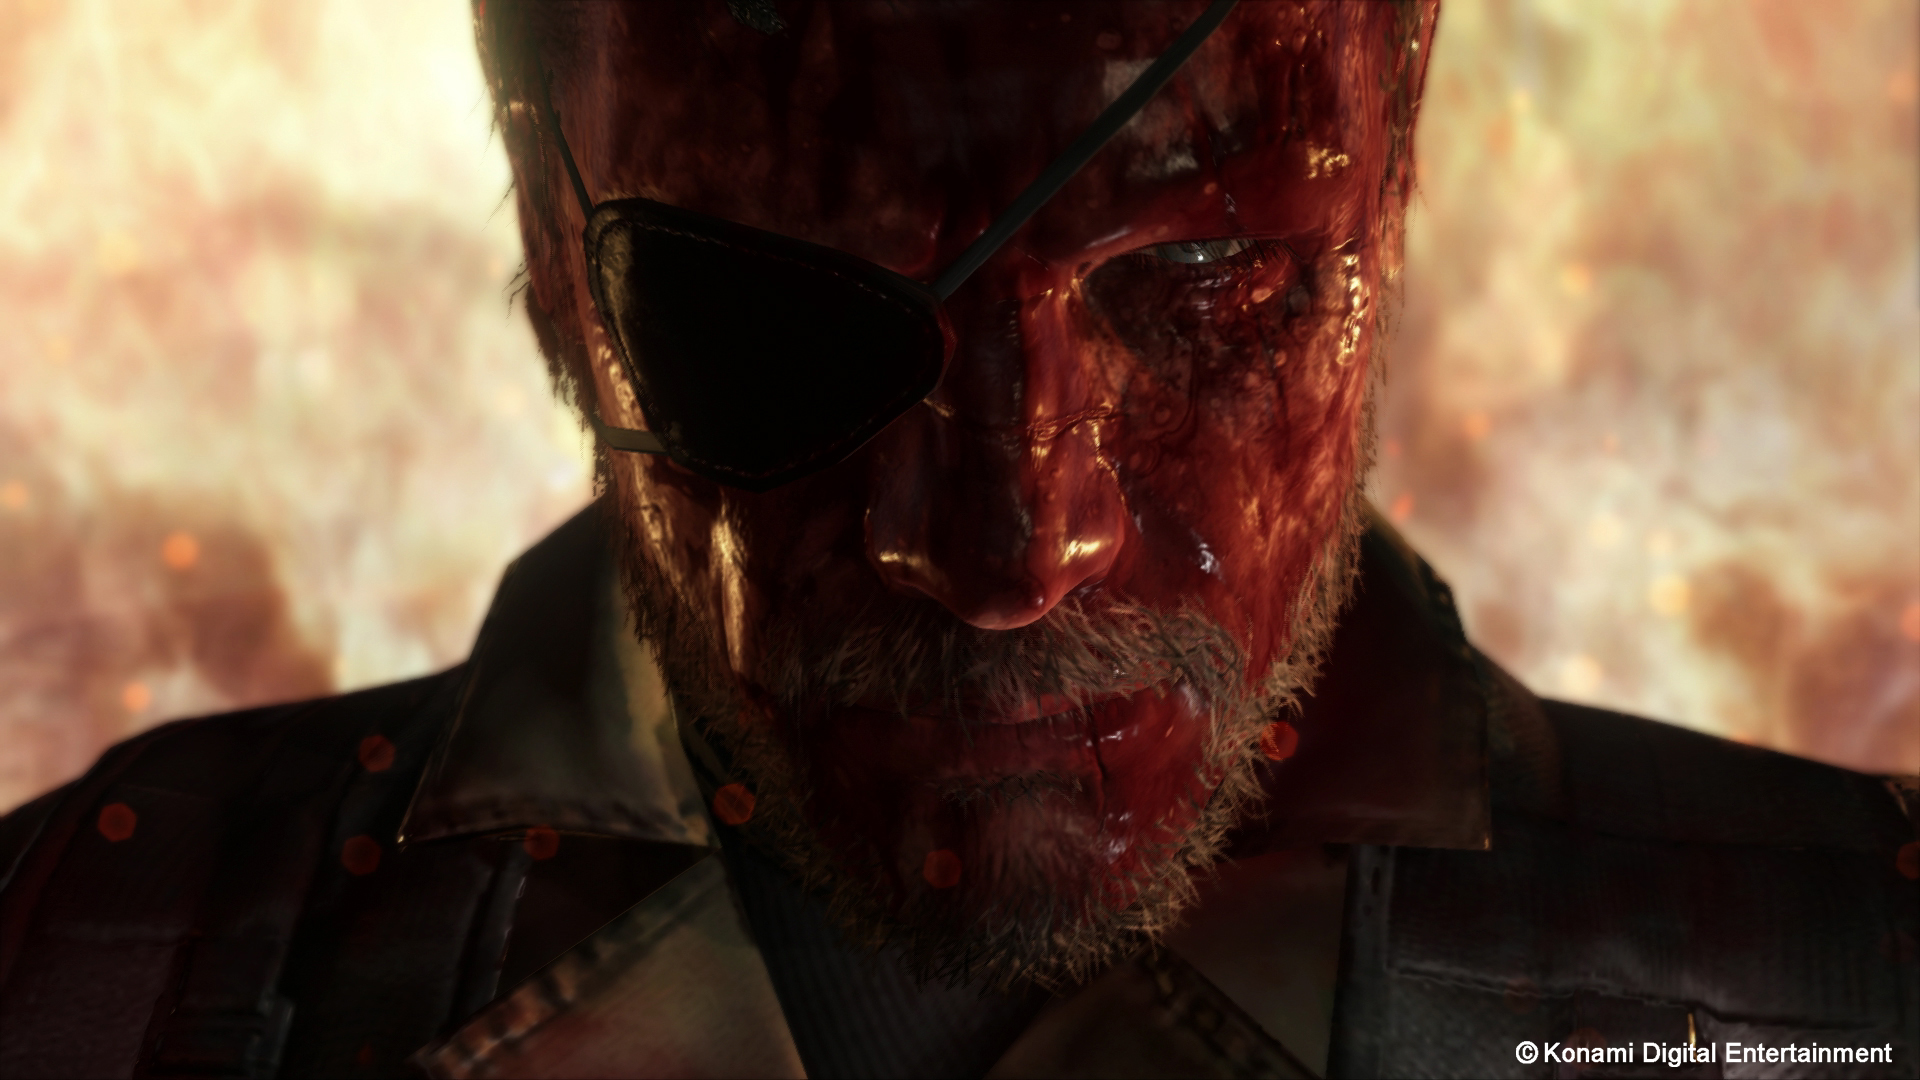 Big Boss (Kiefer Sutherland/Akio Ōtsuka) covered in blood and backed by flames in Metal Gear Solid V: The Phantom Pain (2015), Konami